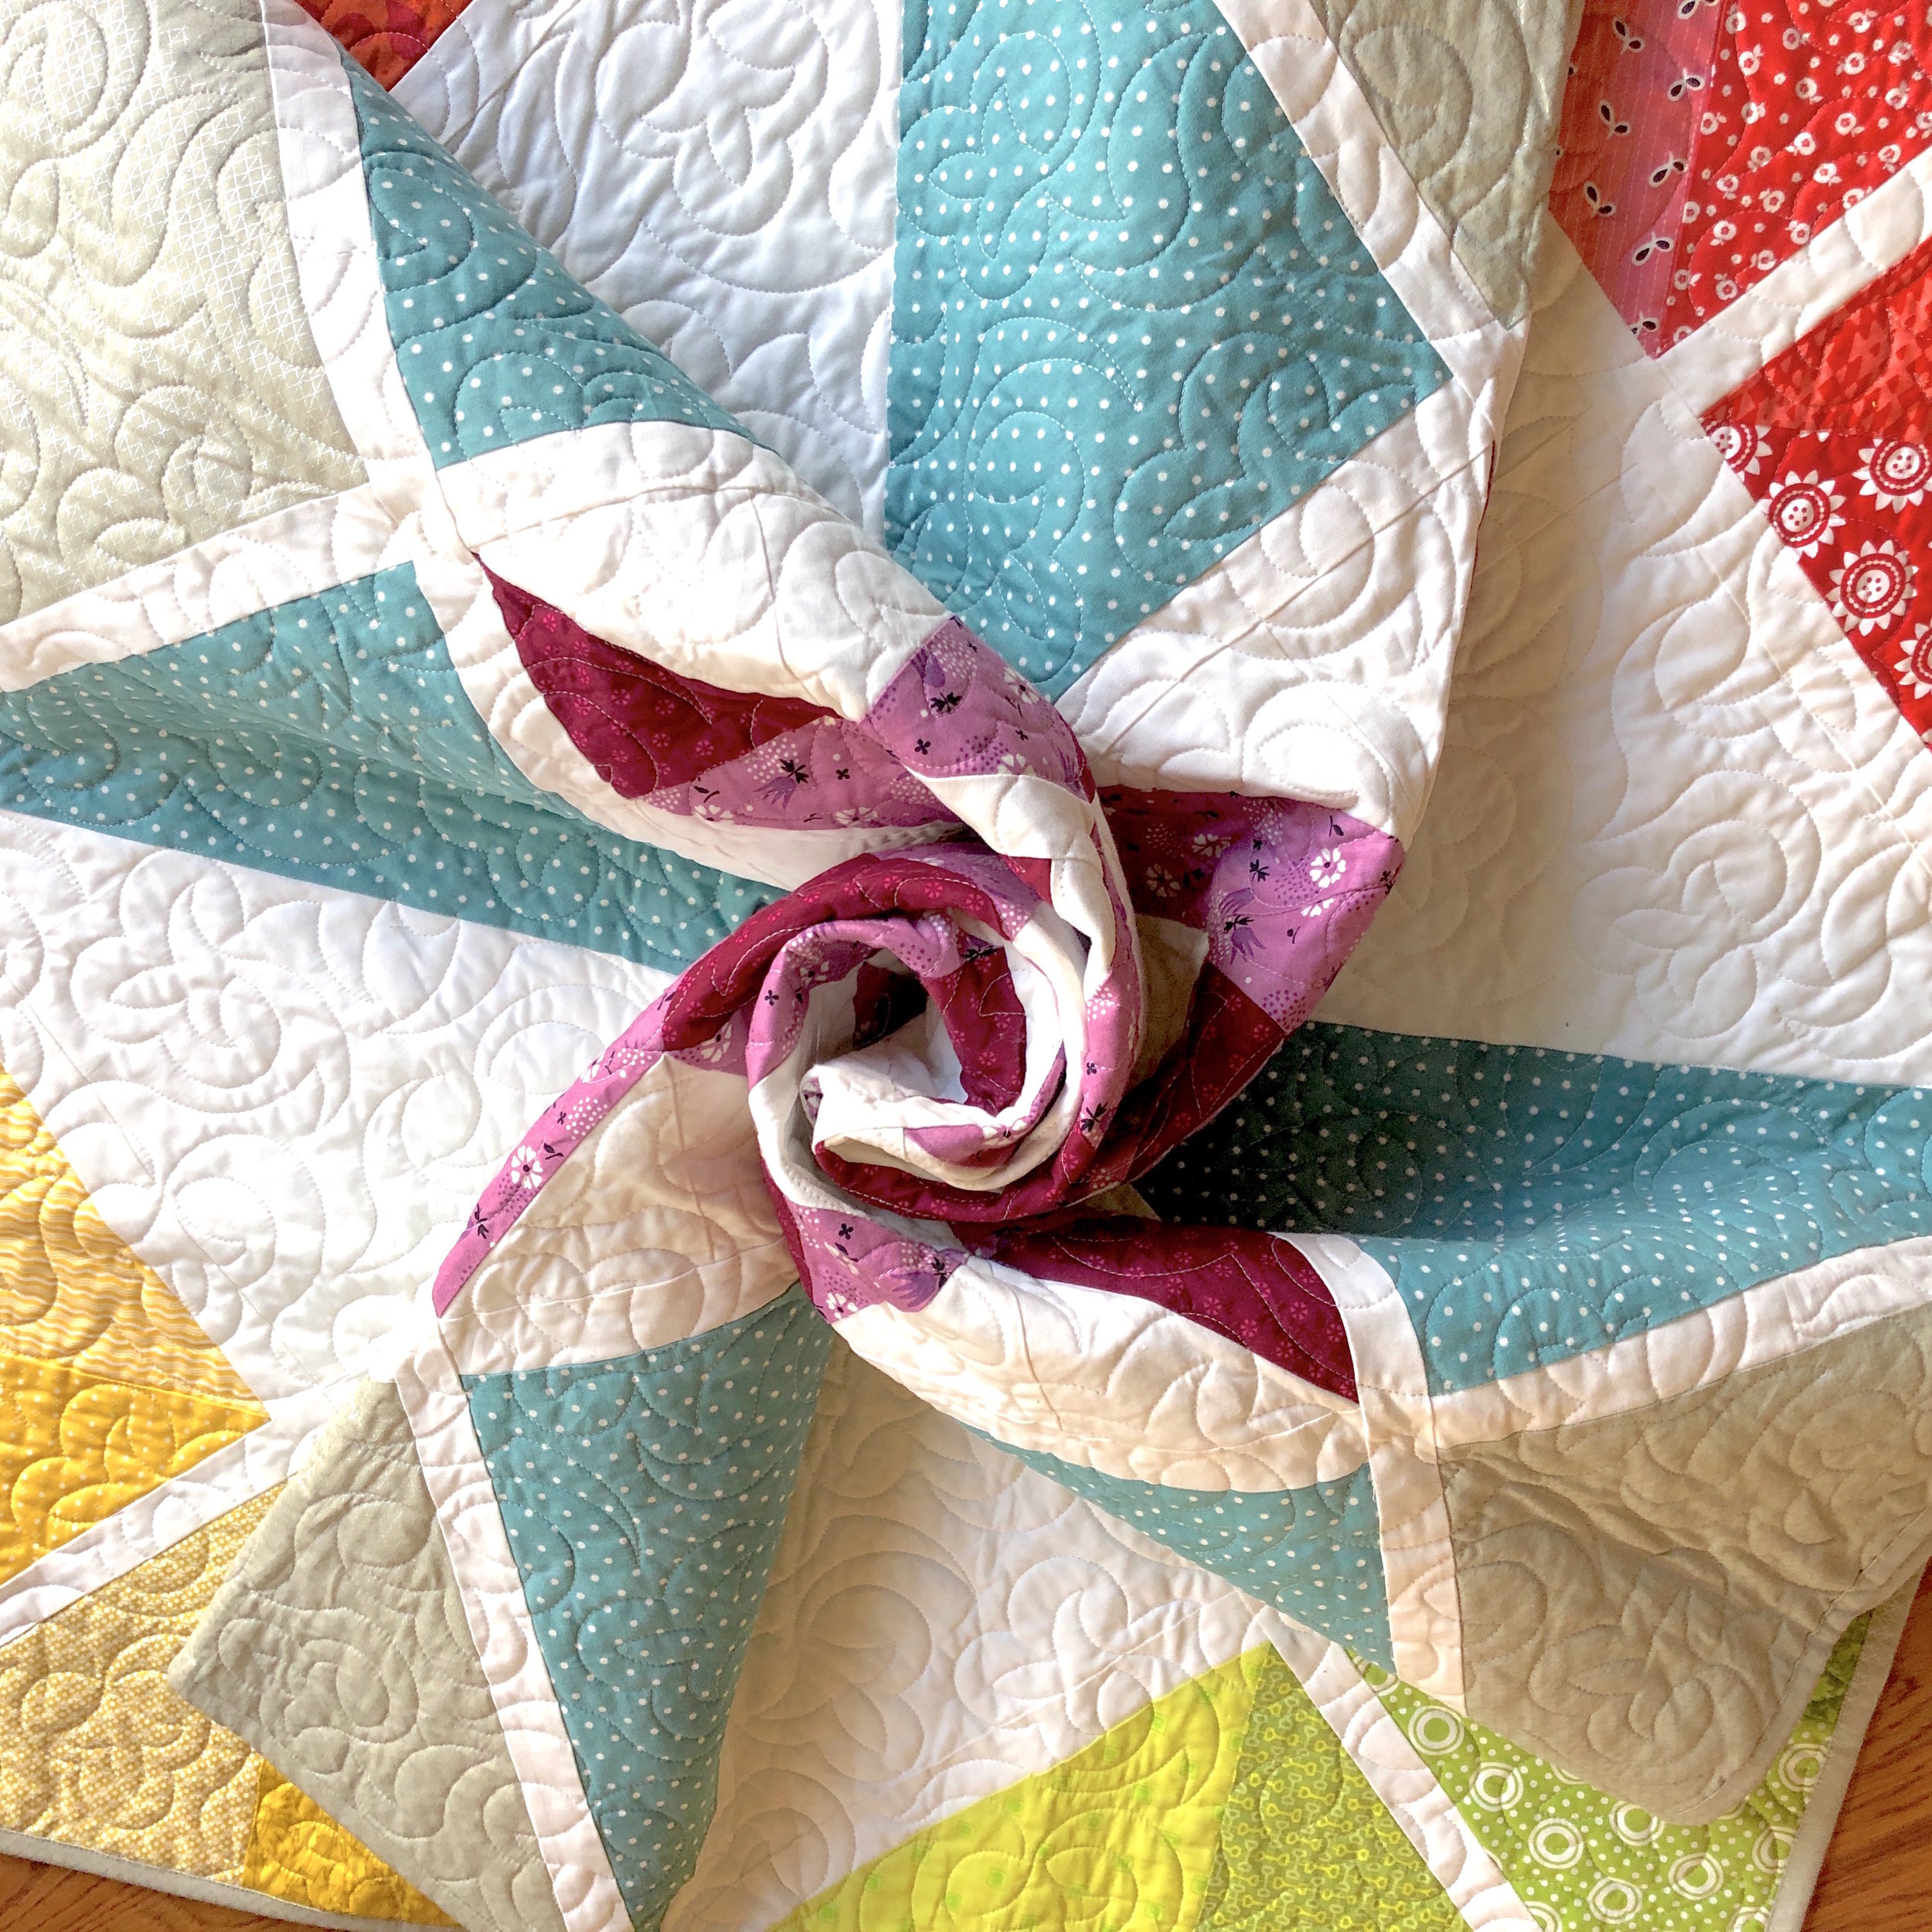 iThinksew - Patterns and More - Starry Pinwheel – ten size FPP pattern  incl. quilt fabric requirements (PDF Download)